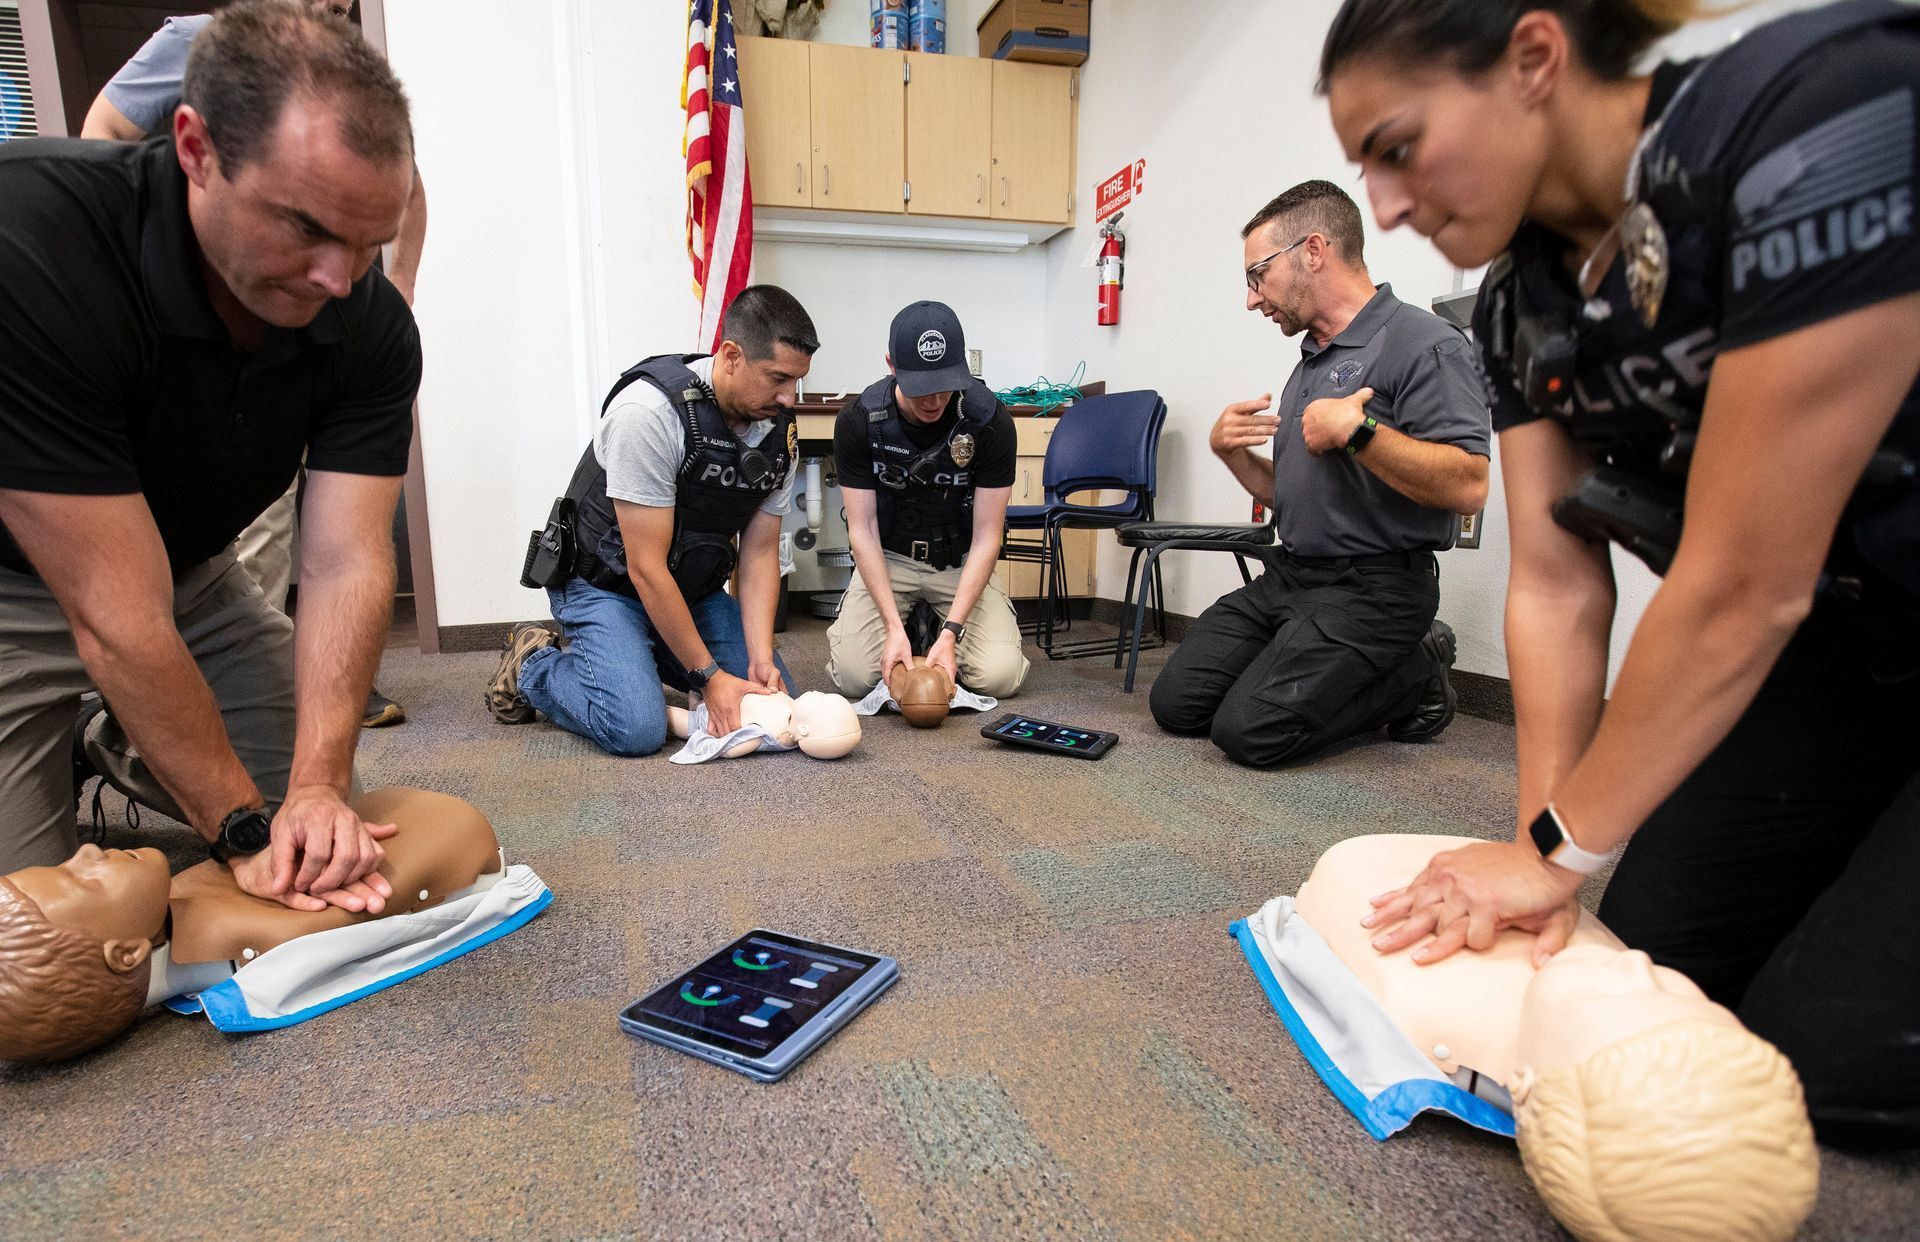 Tim Freund, a SWAT medic and director of training for Griffith Blue Heart, instructs Flagstaff police officers on increasing their cardio-cerebral resuscitation performance.